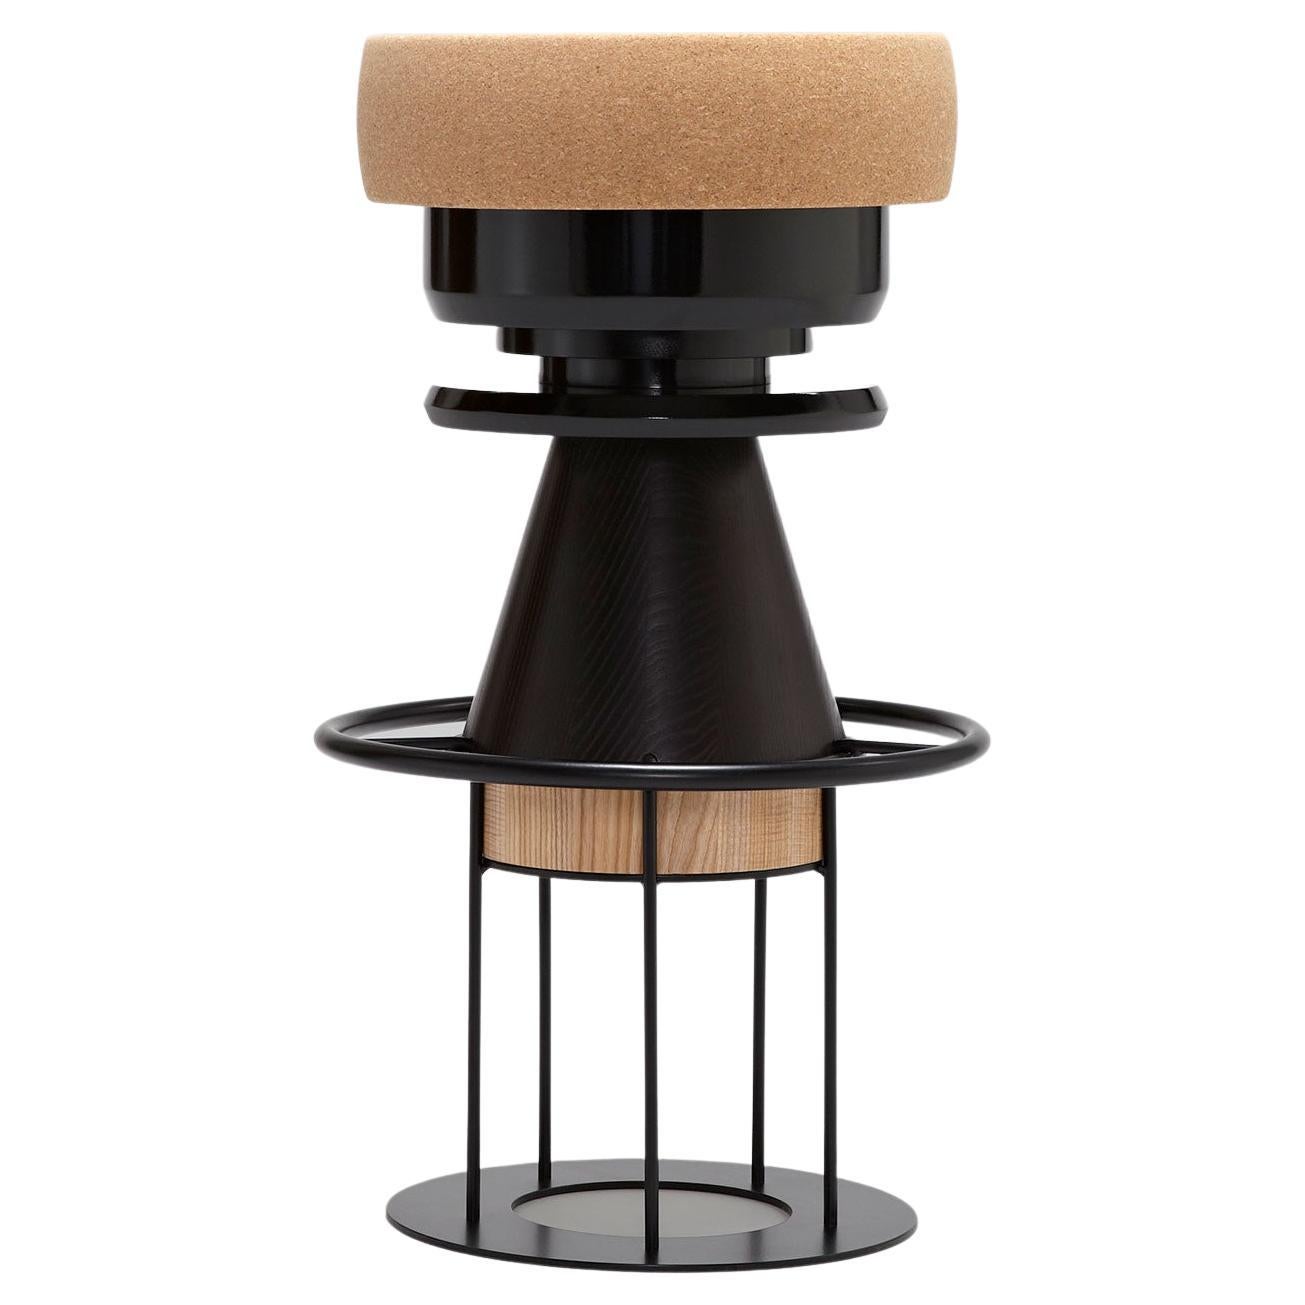 Tembo Stool, Shades of Black, by Note Design Studio for La Chance